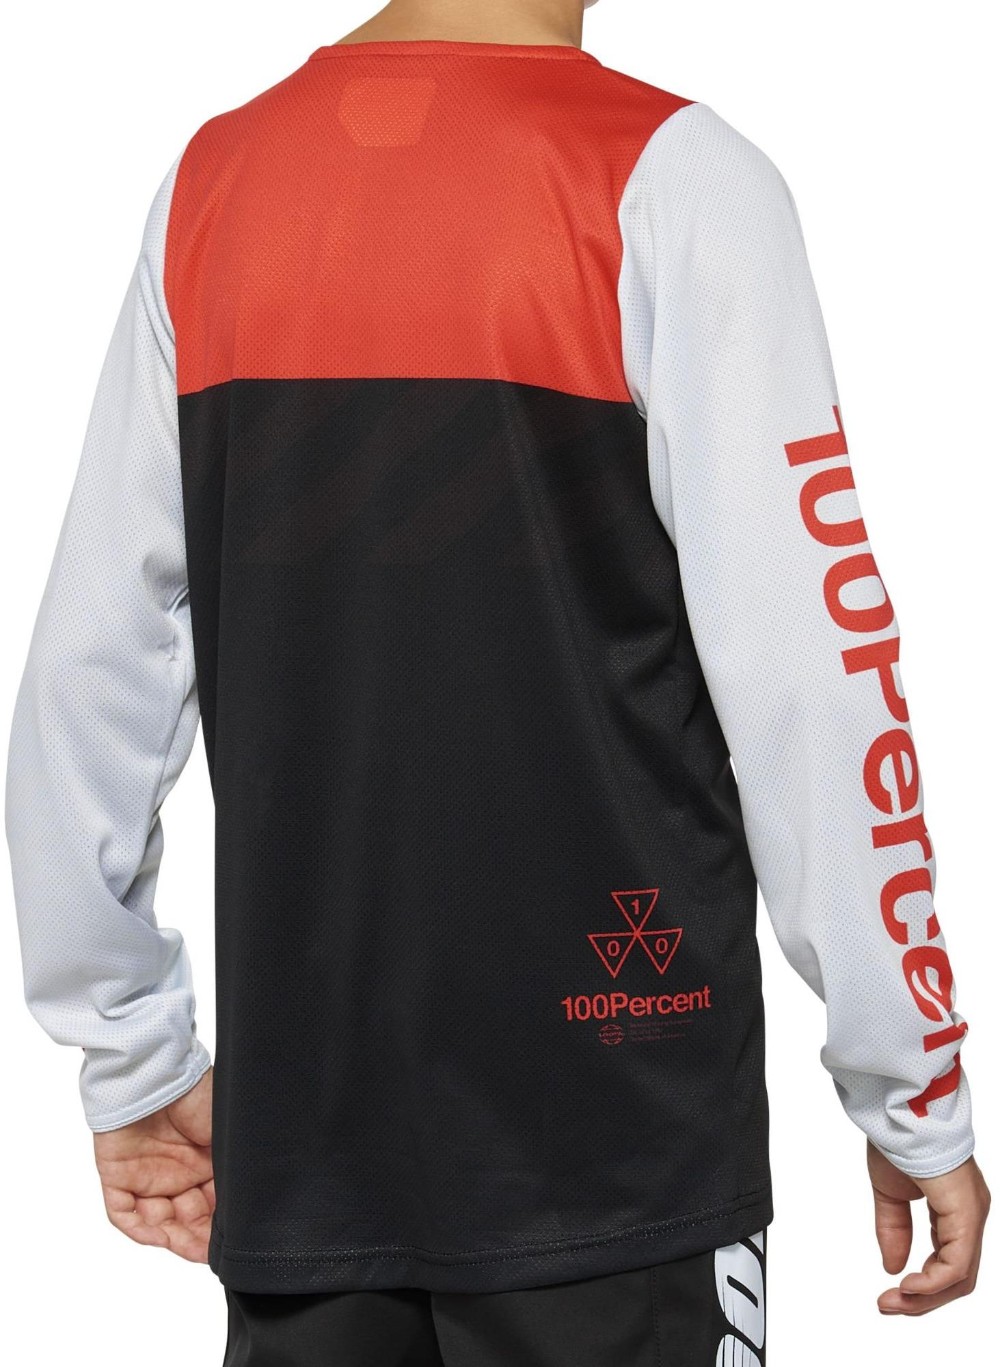 R-Core Youth Long Sleeve MTB Cycling Jersey image 1